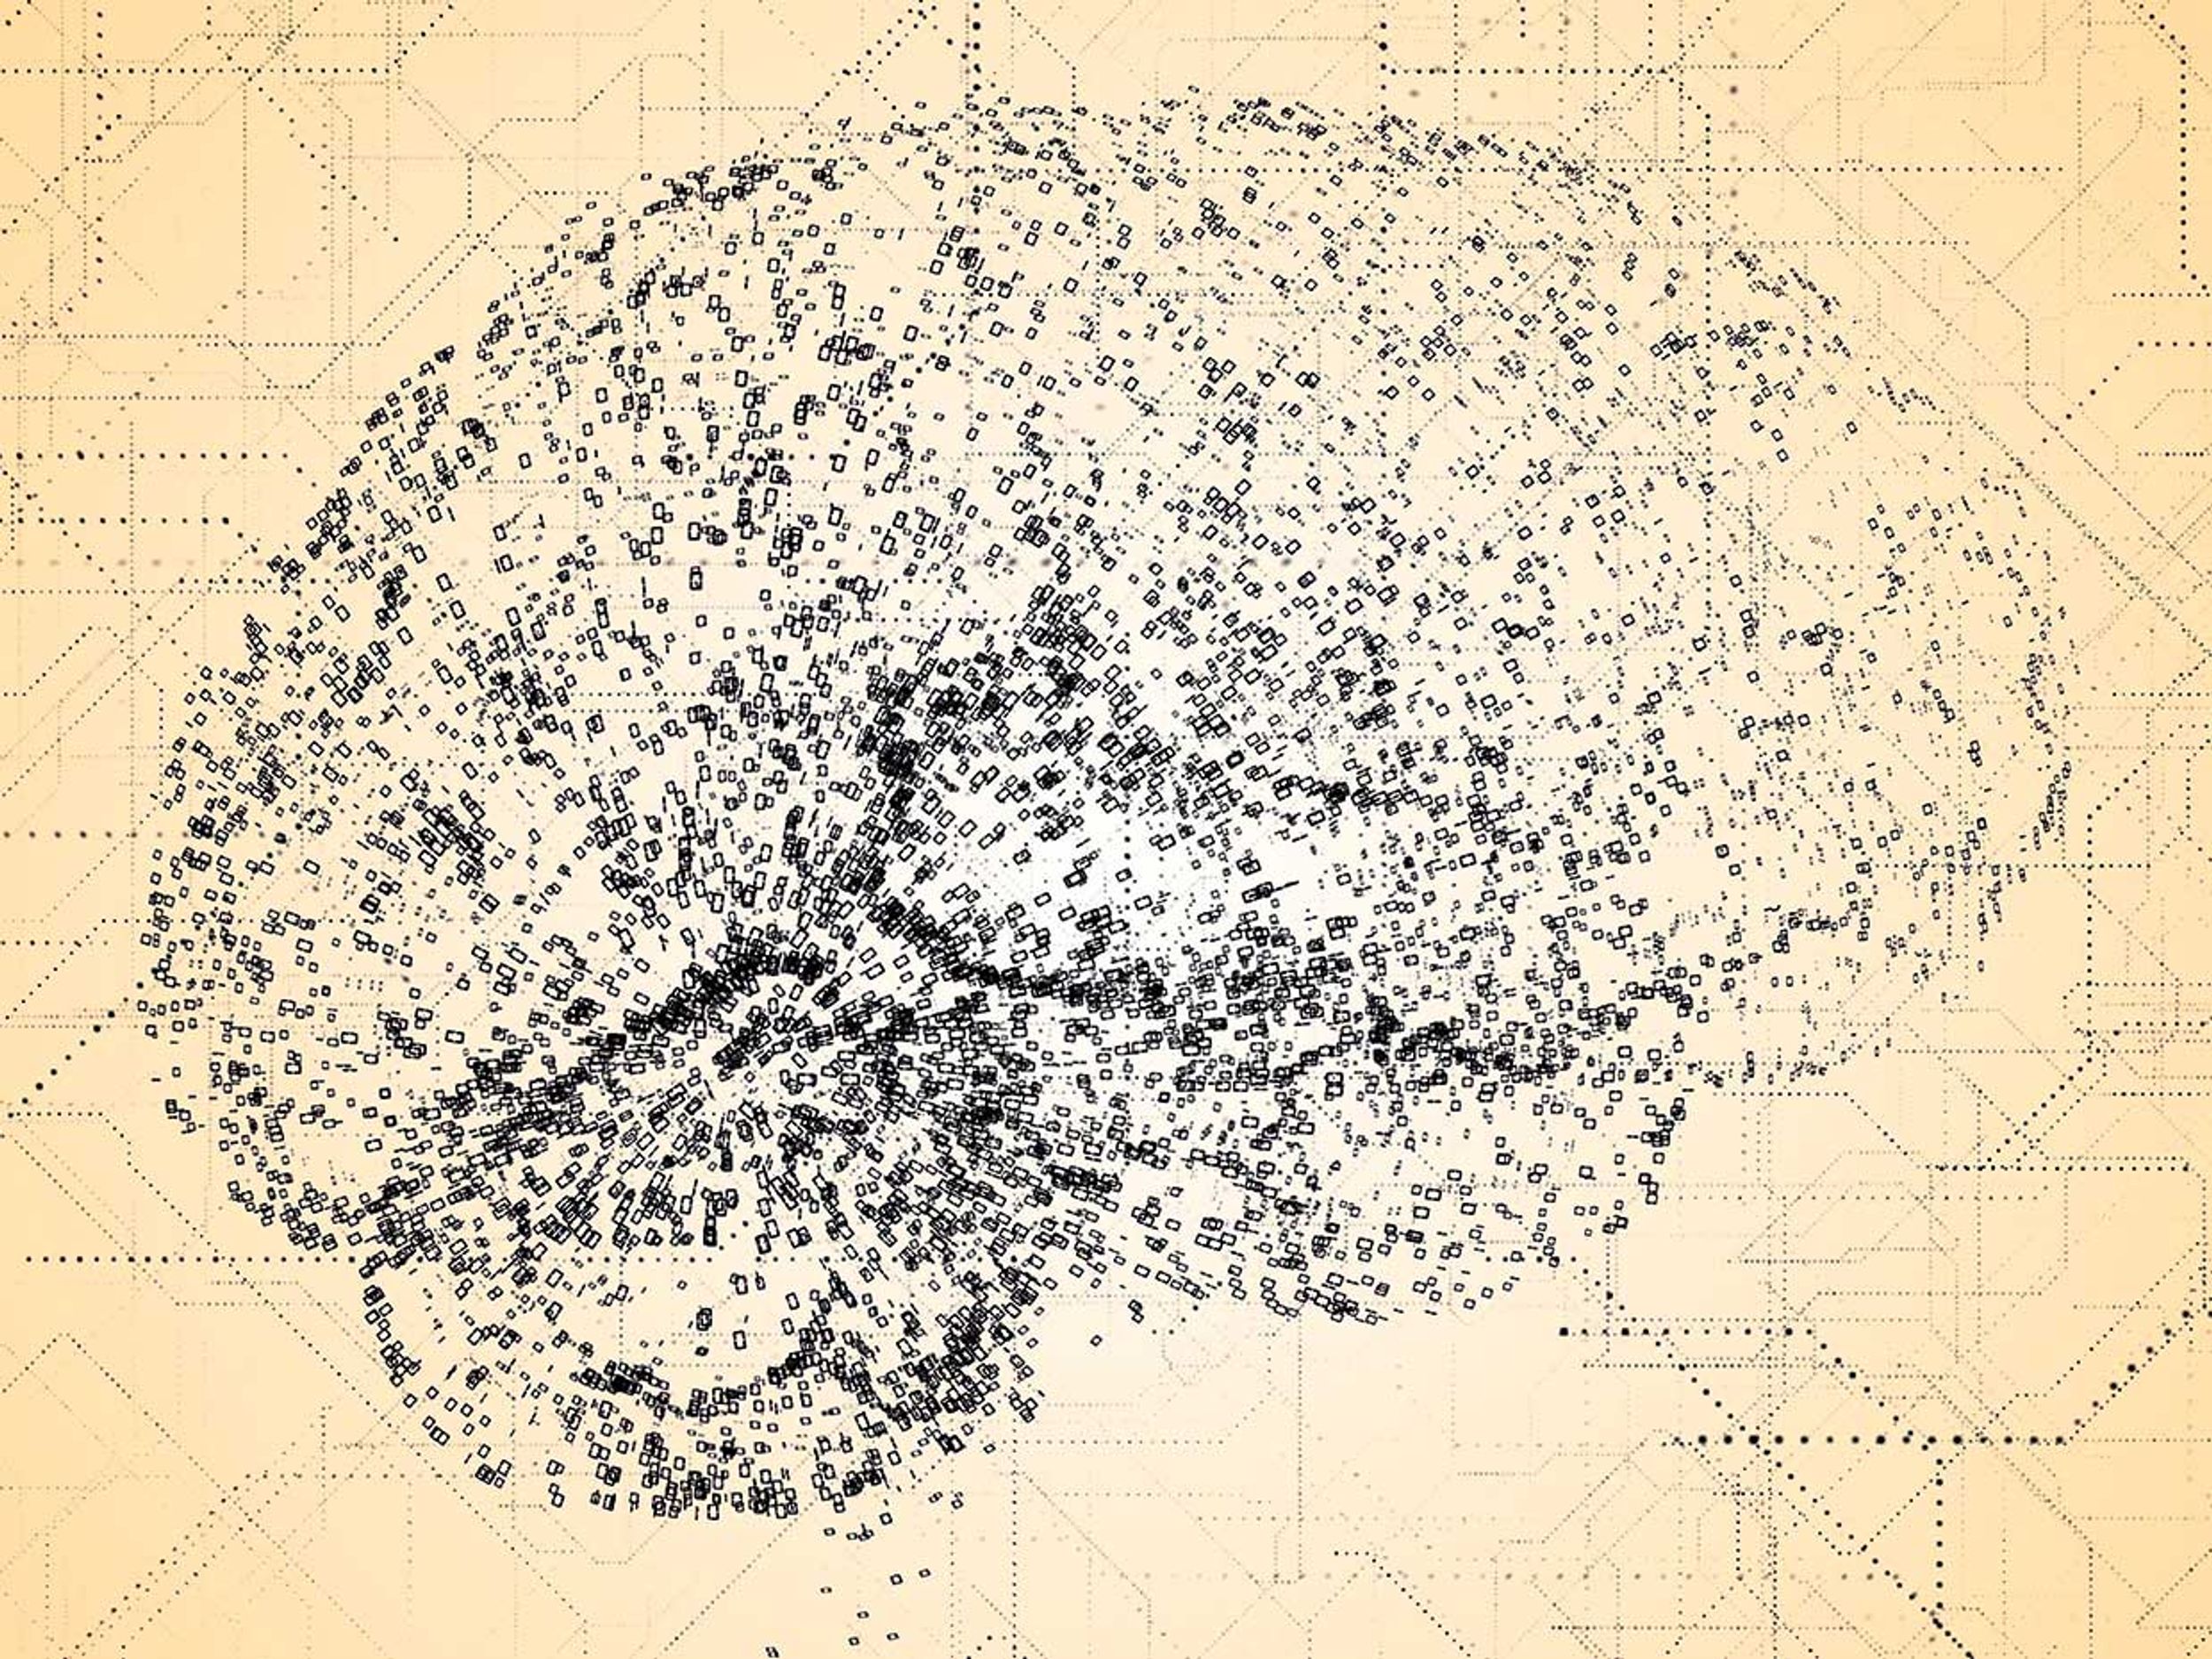 Illustration of a brain formed with 0s and 1s with a blueprint-like background